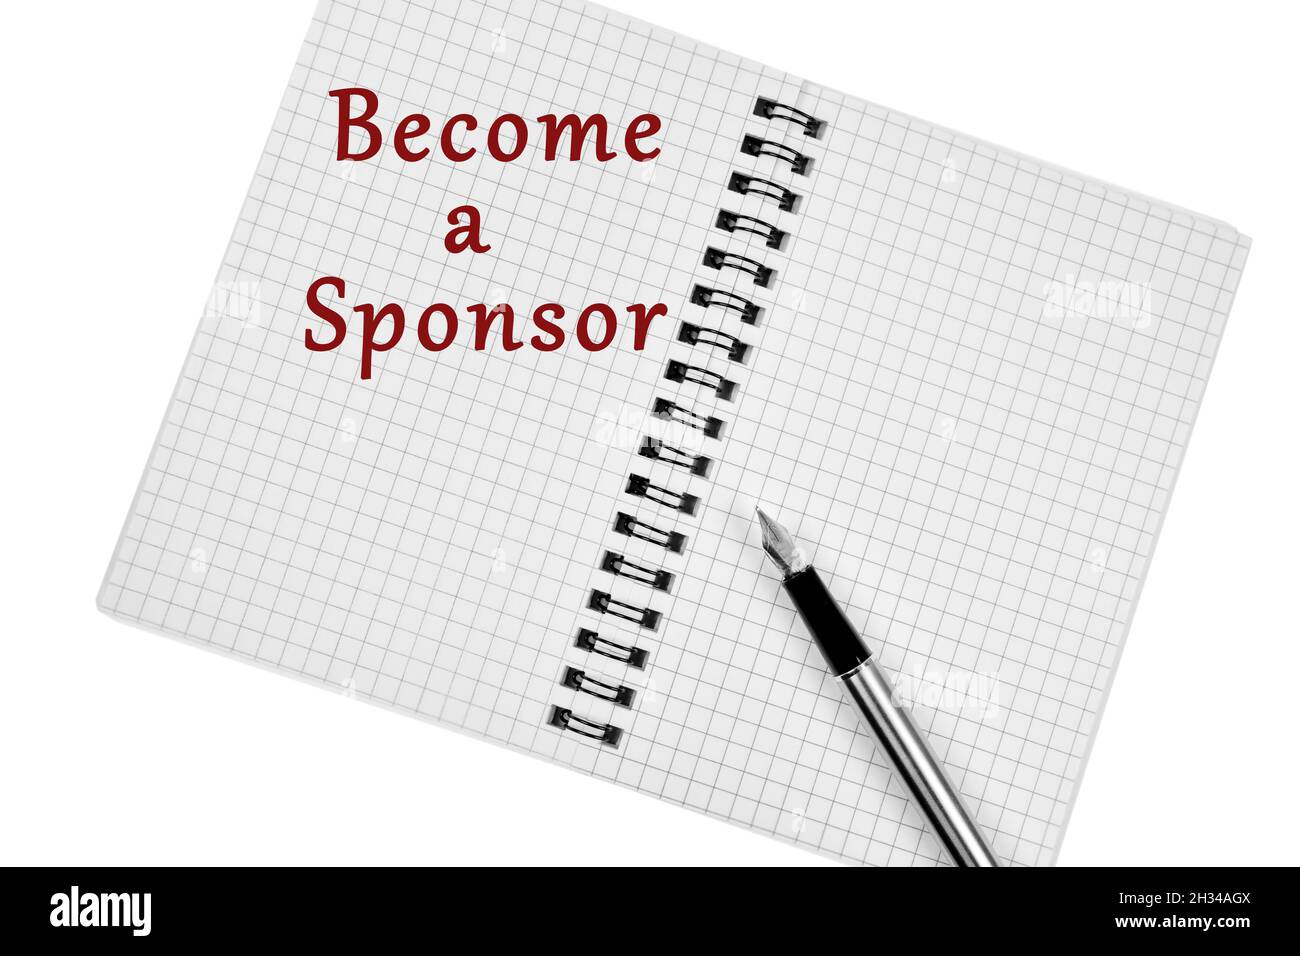 Become a sponsor words on notebook page close up Stock Photo